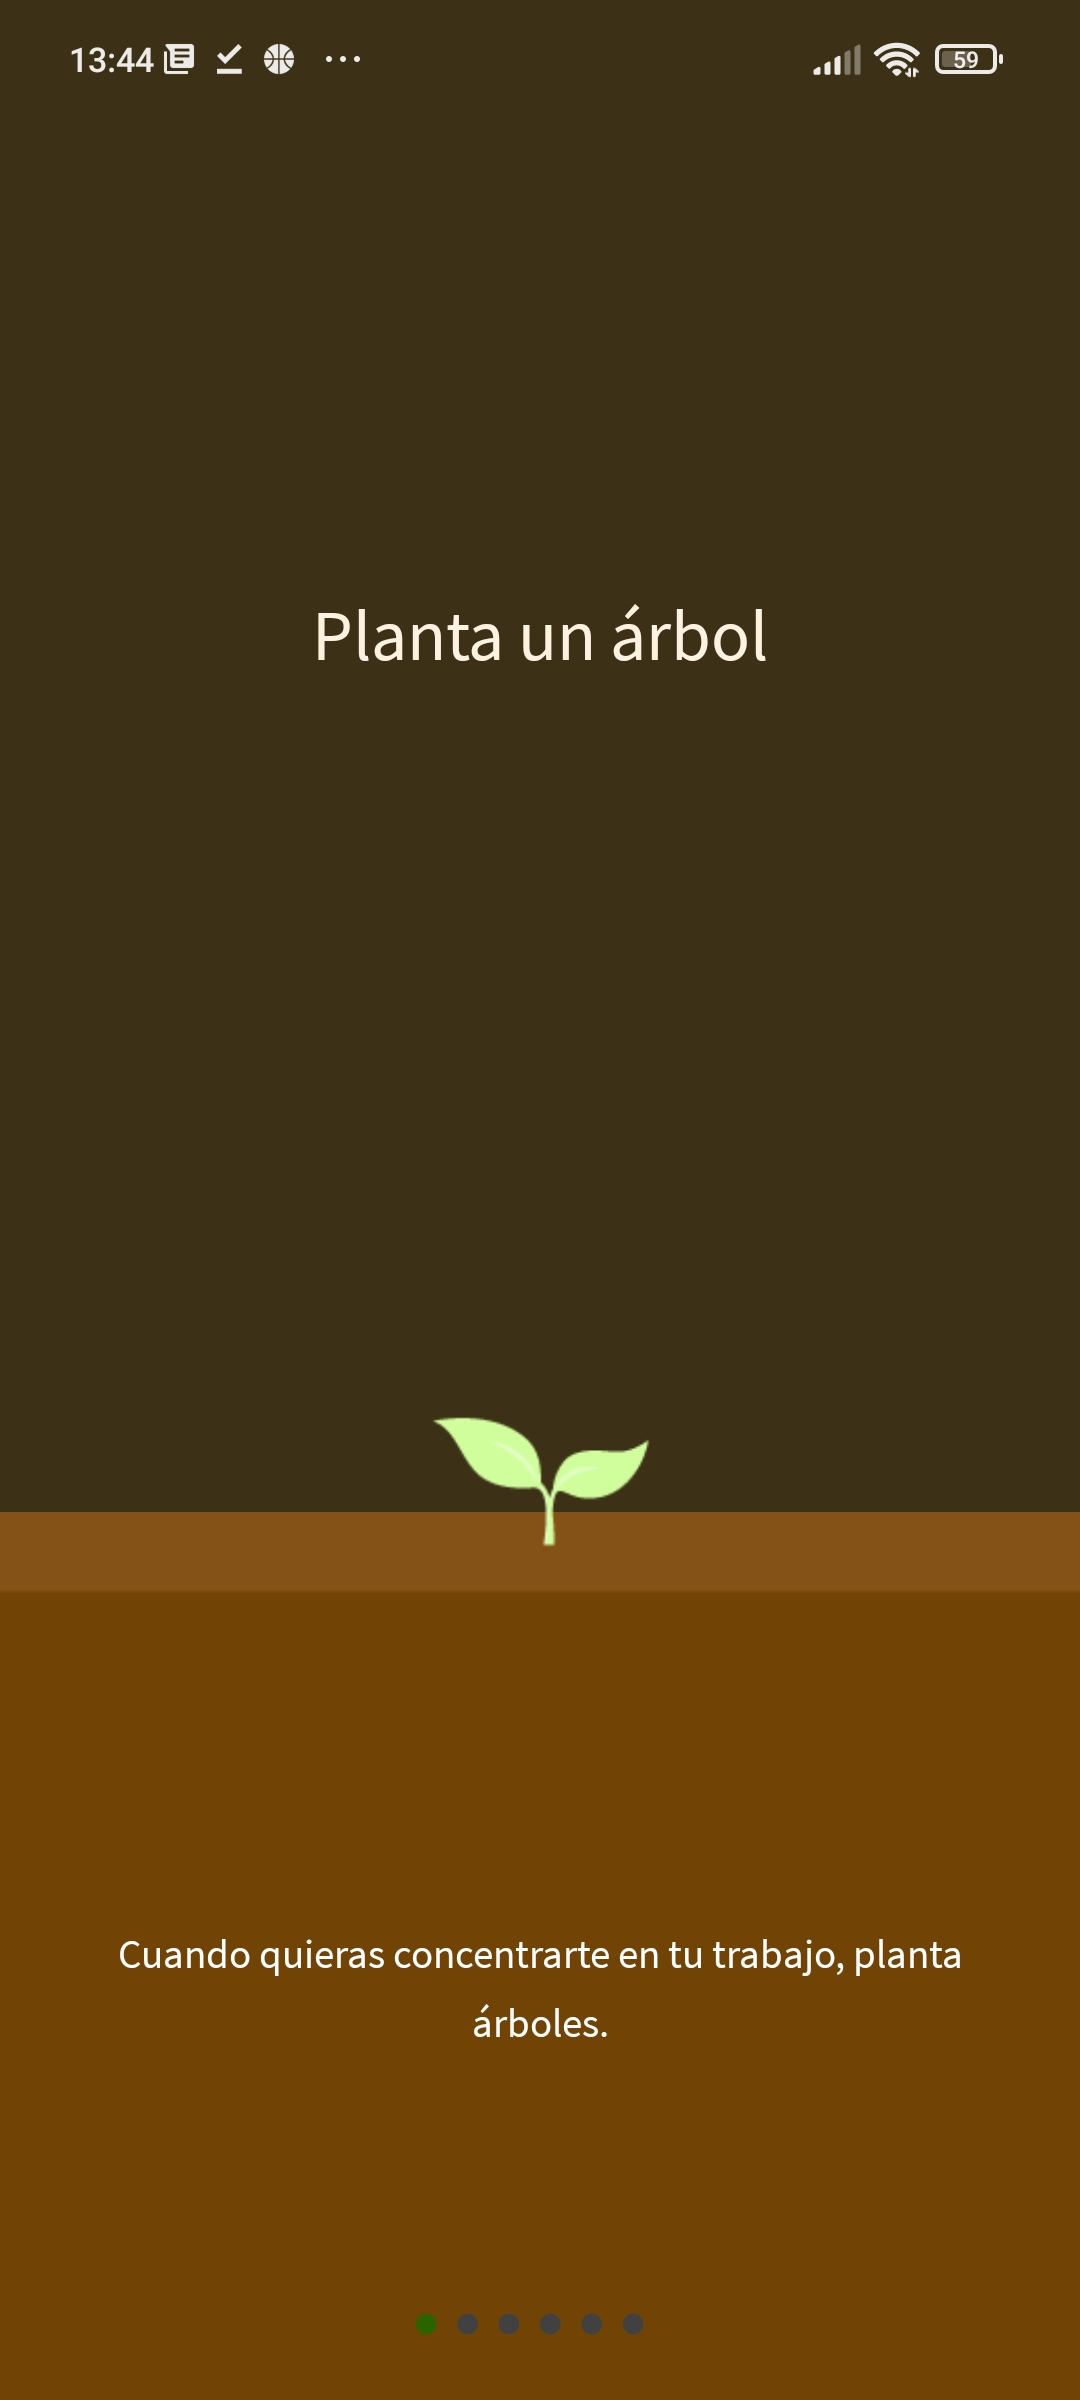 Image showing a newly planted tree in the app.